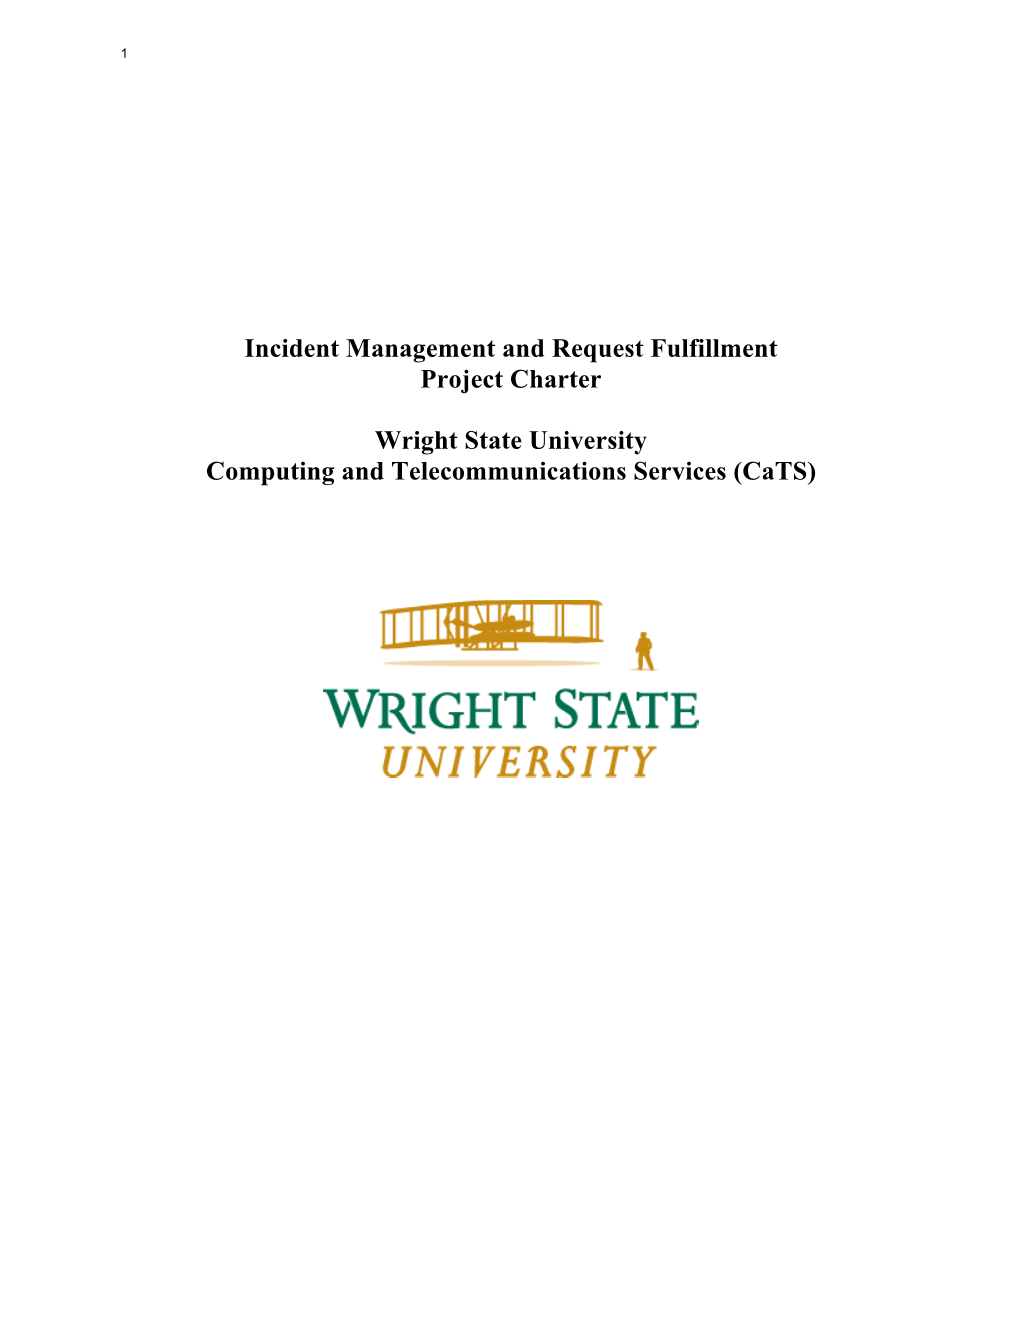 Incident Management and Request Fulfillment Project Charter Wright State University Computing and Telecommunications Services (